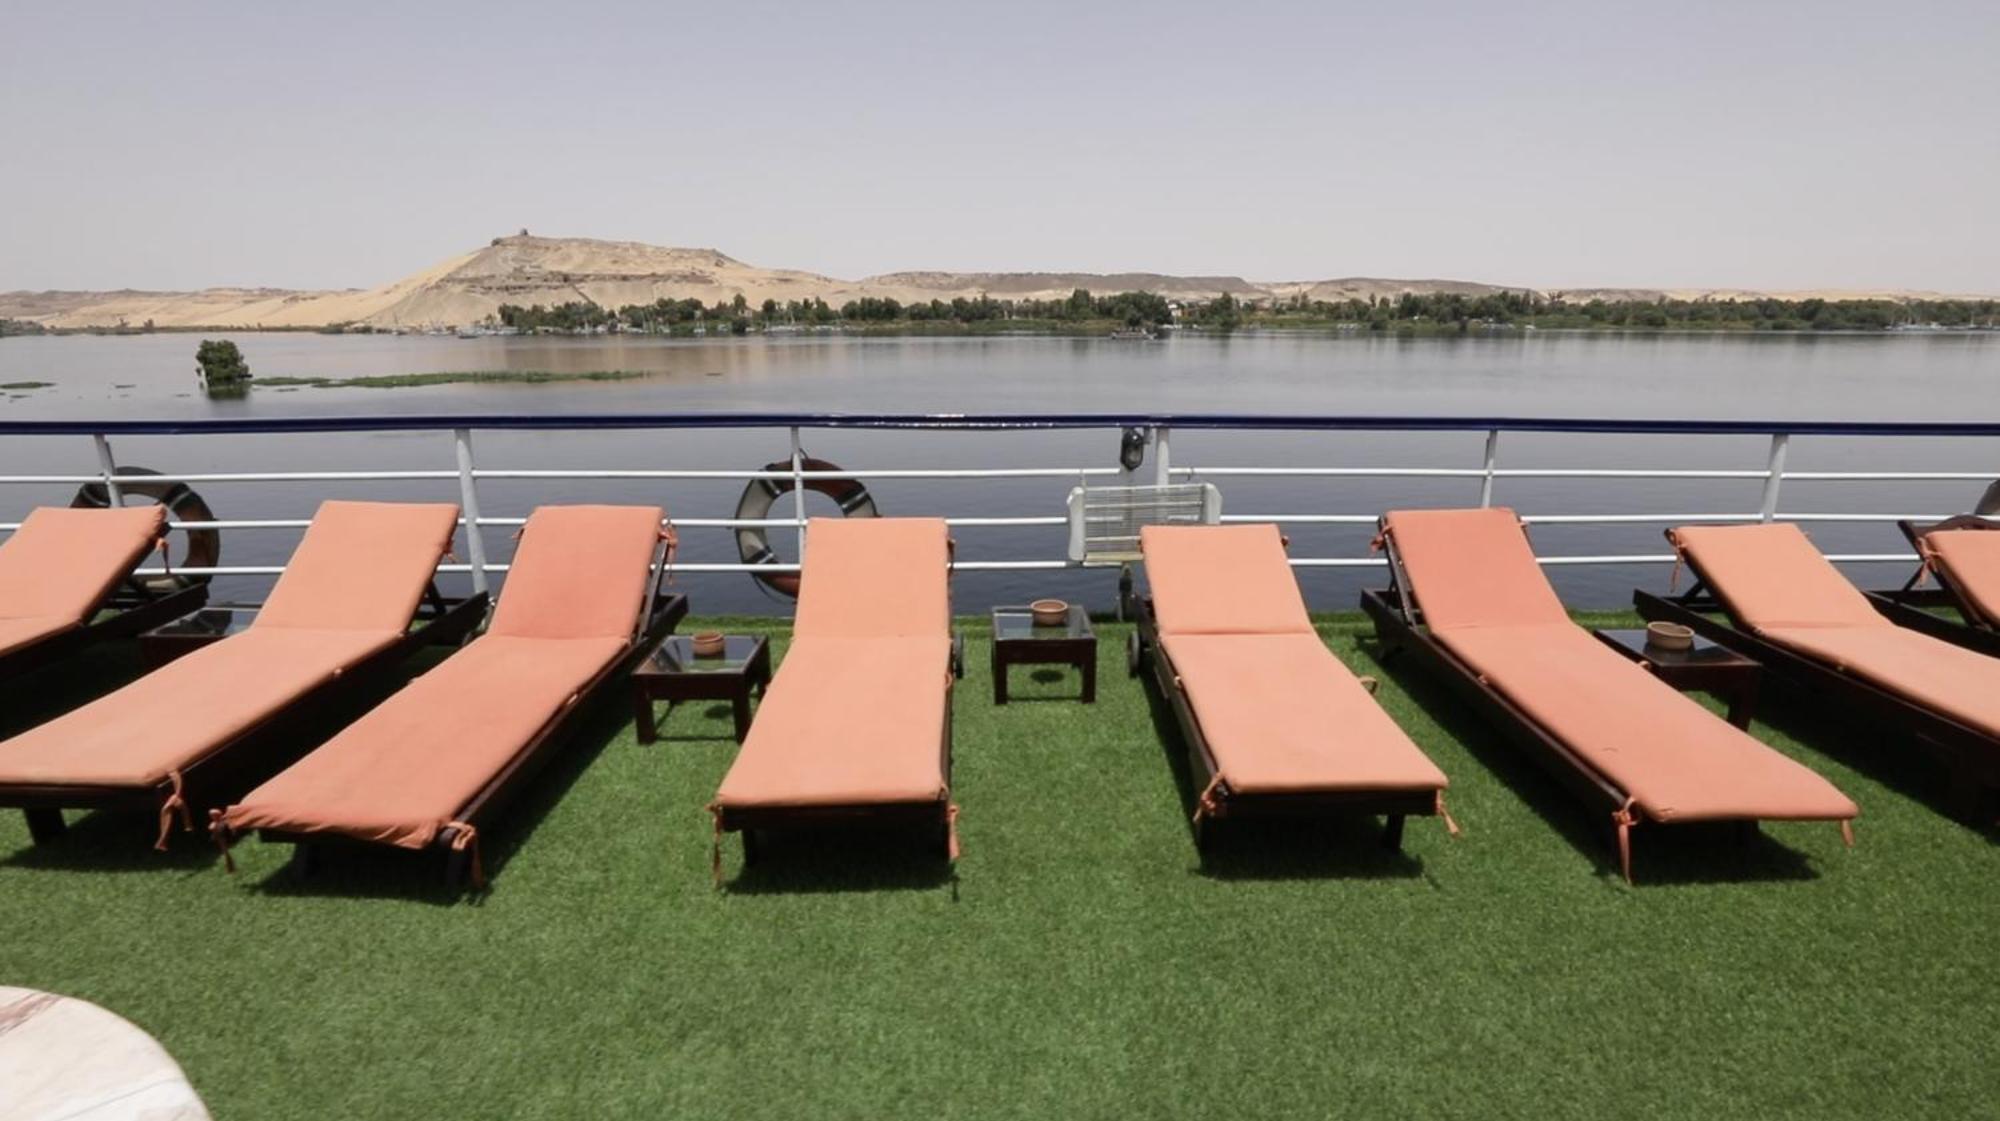 M/S Royal Adventure - Saturday From Luxor 4 Or 7 Nights - Wednesday From Aswan 3 Or 7 Nights酒店 外观 照片